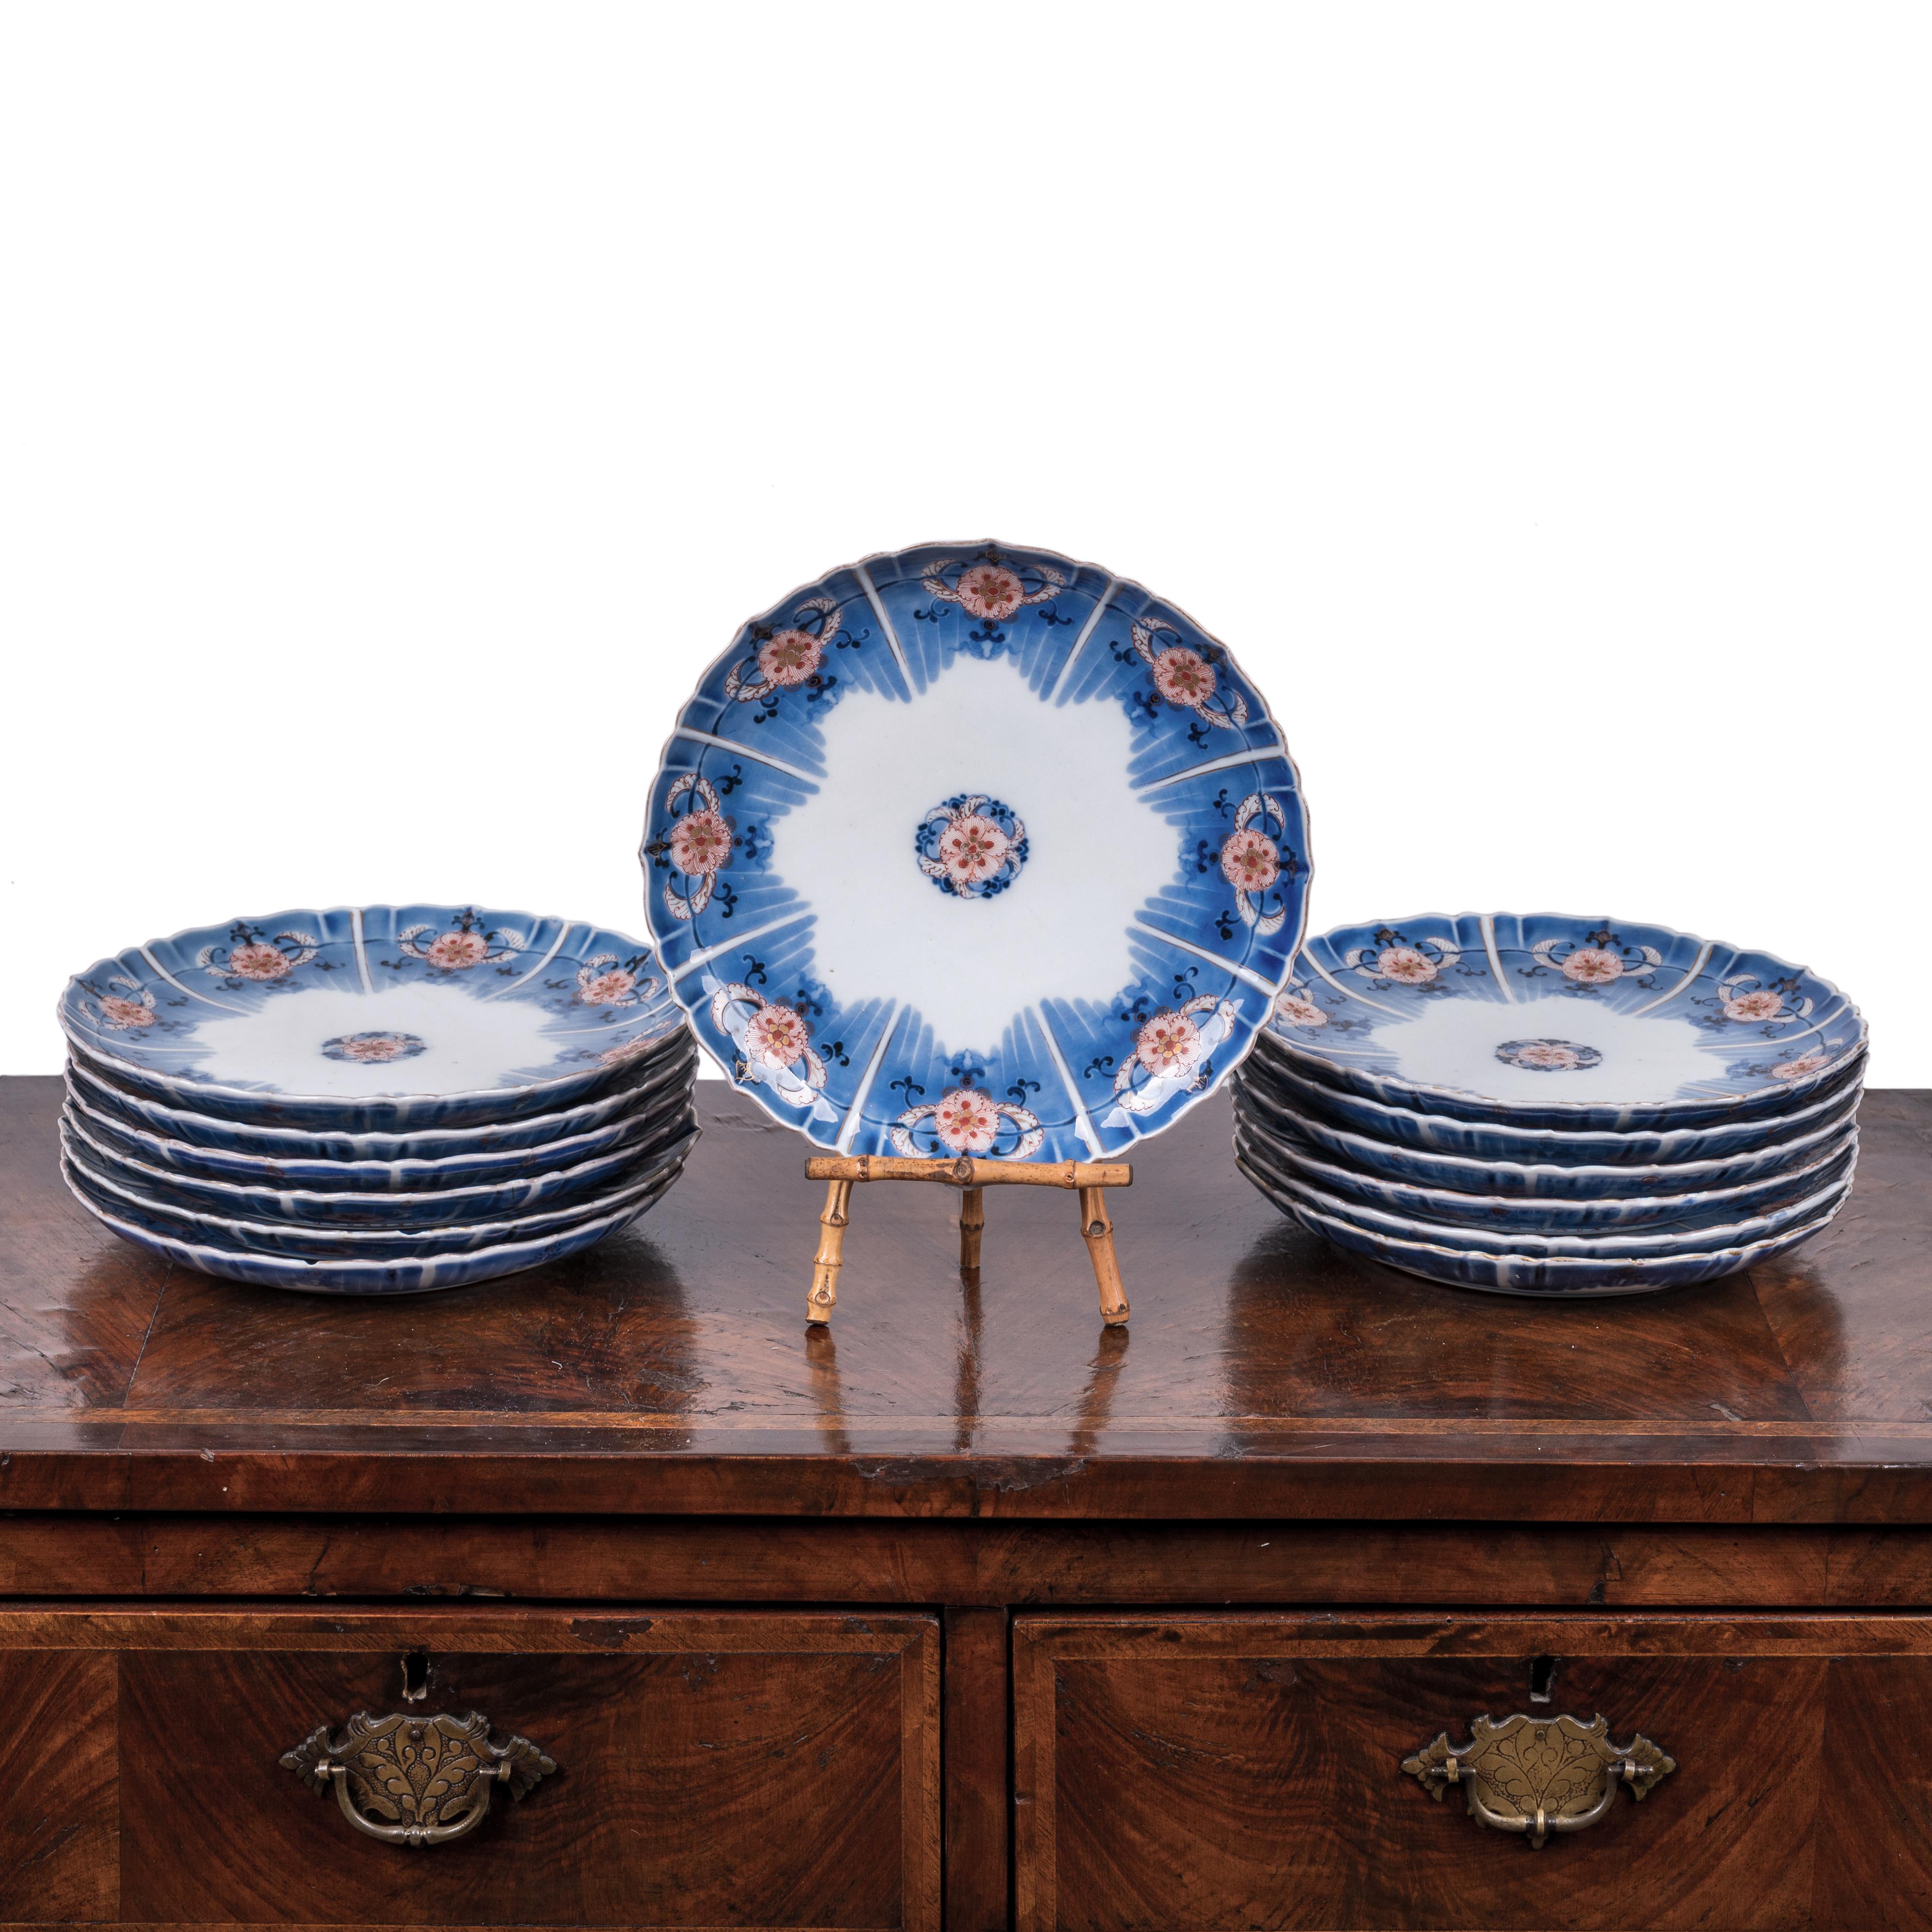 A rare group of 13 matching Chinese Kangxi imari decorated plates, 18th century.  Nine inches; each plate with six character Kangxi mark. 

